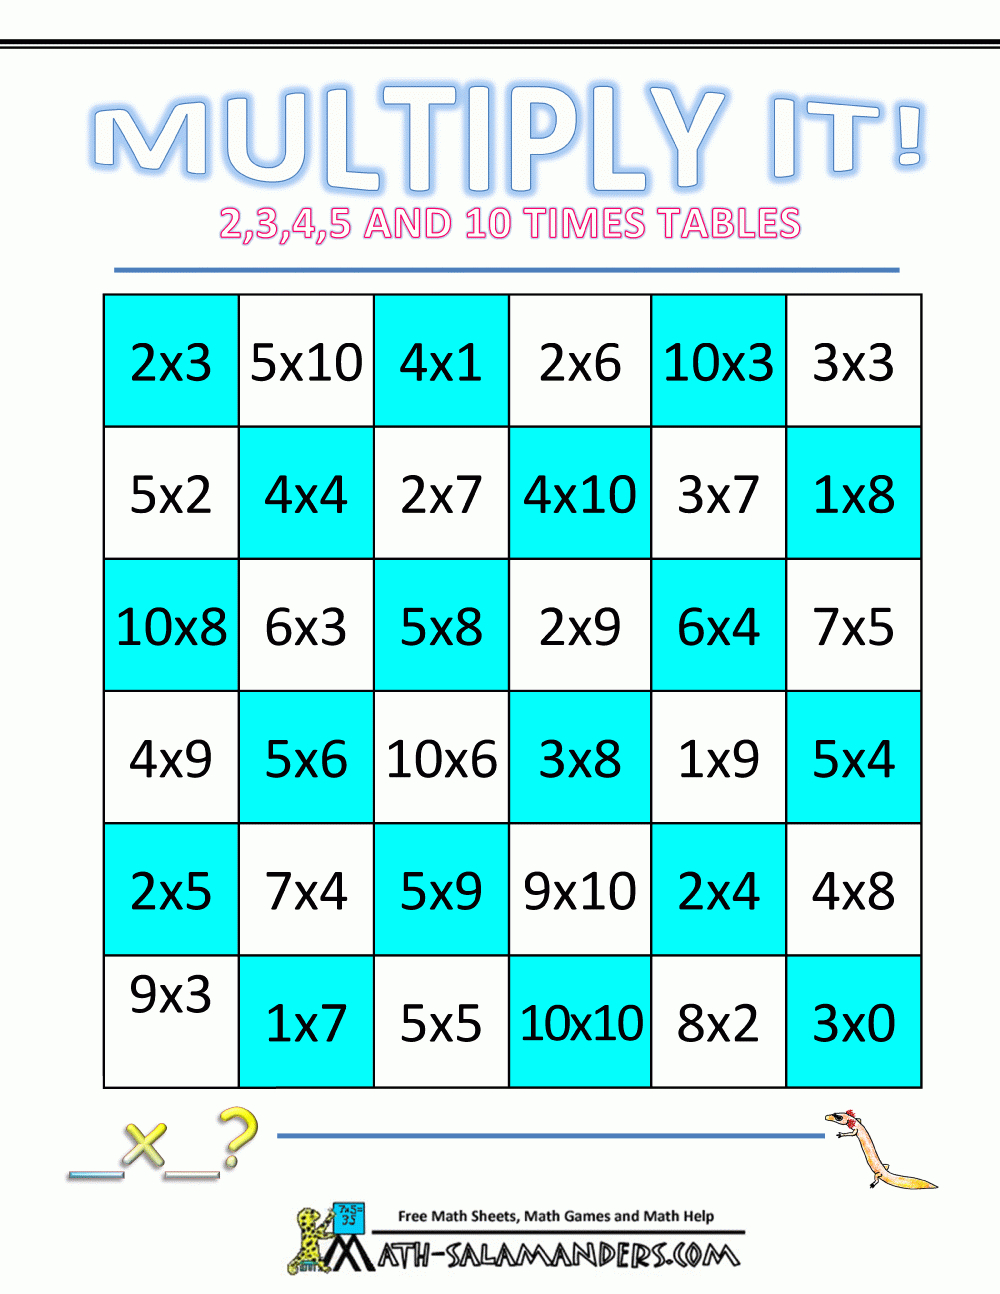 multiplication table games online